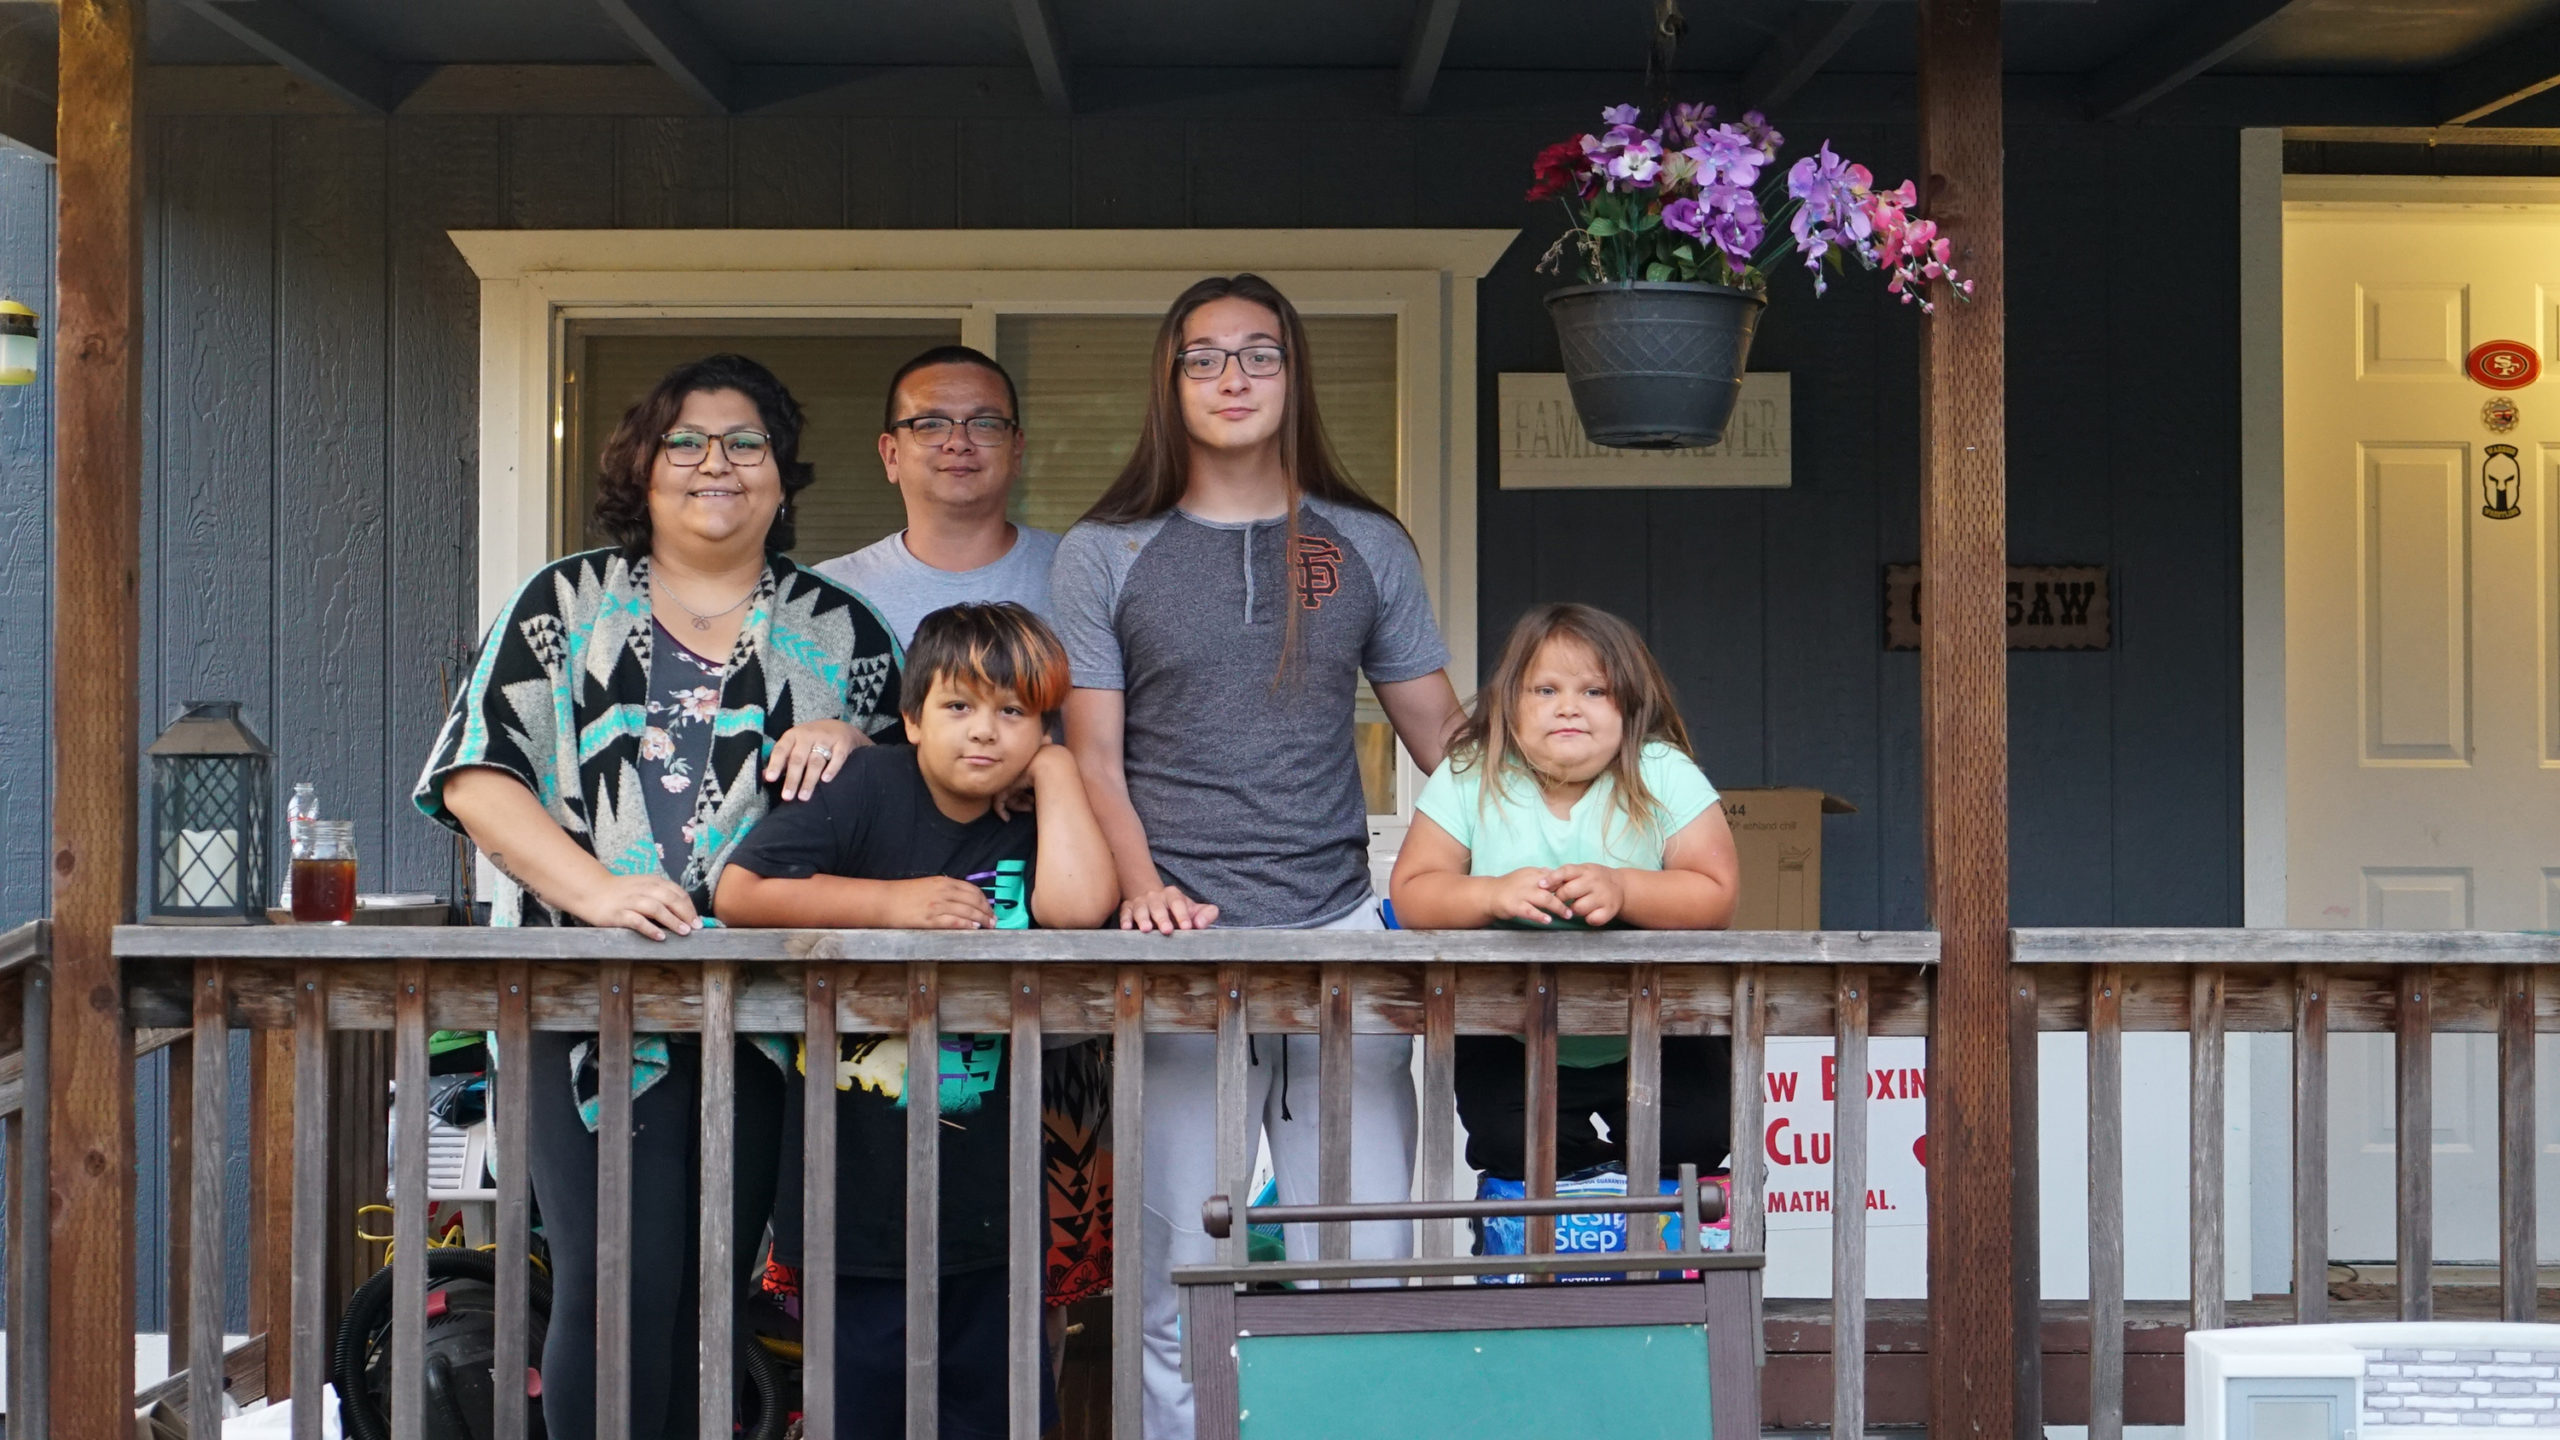 A photo of a family posing for a photo on a porch